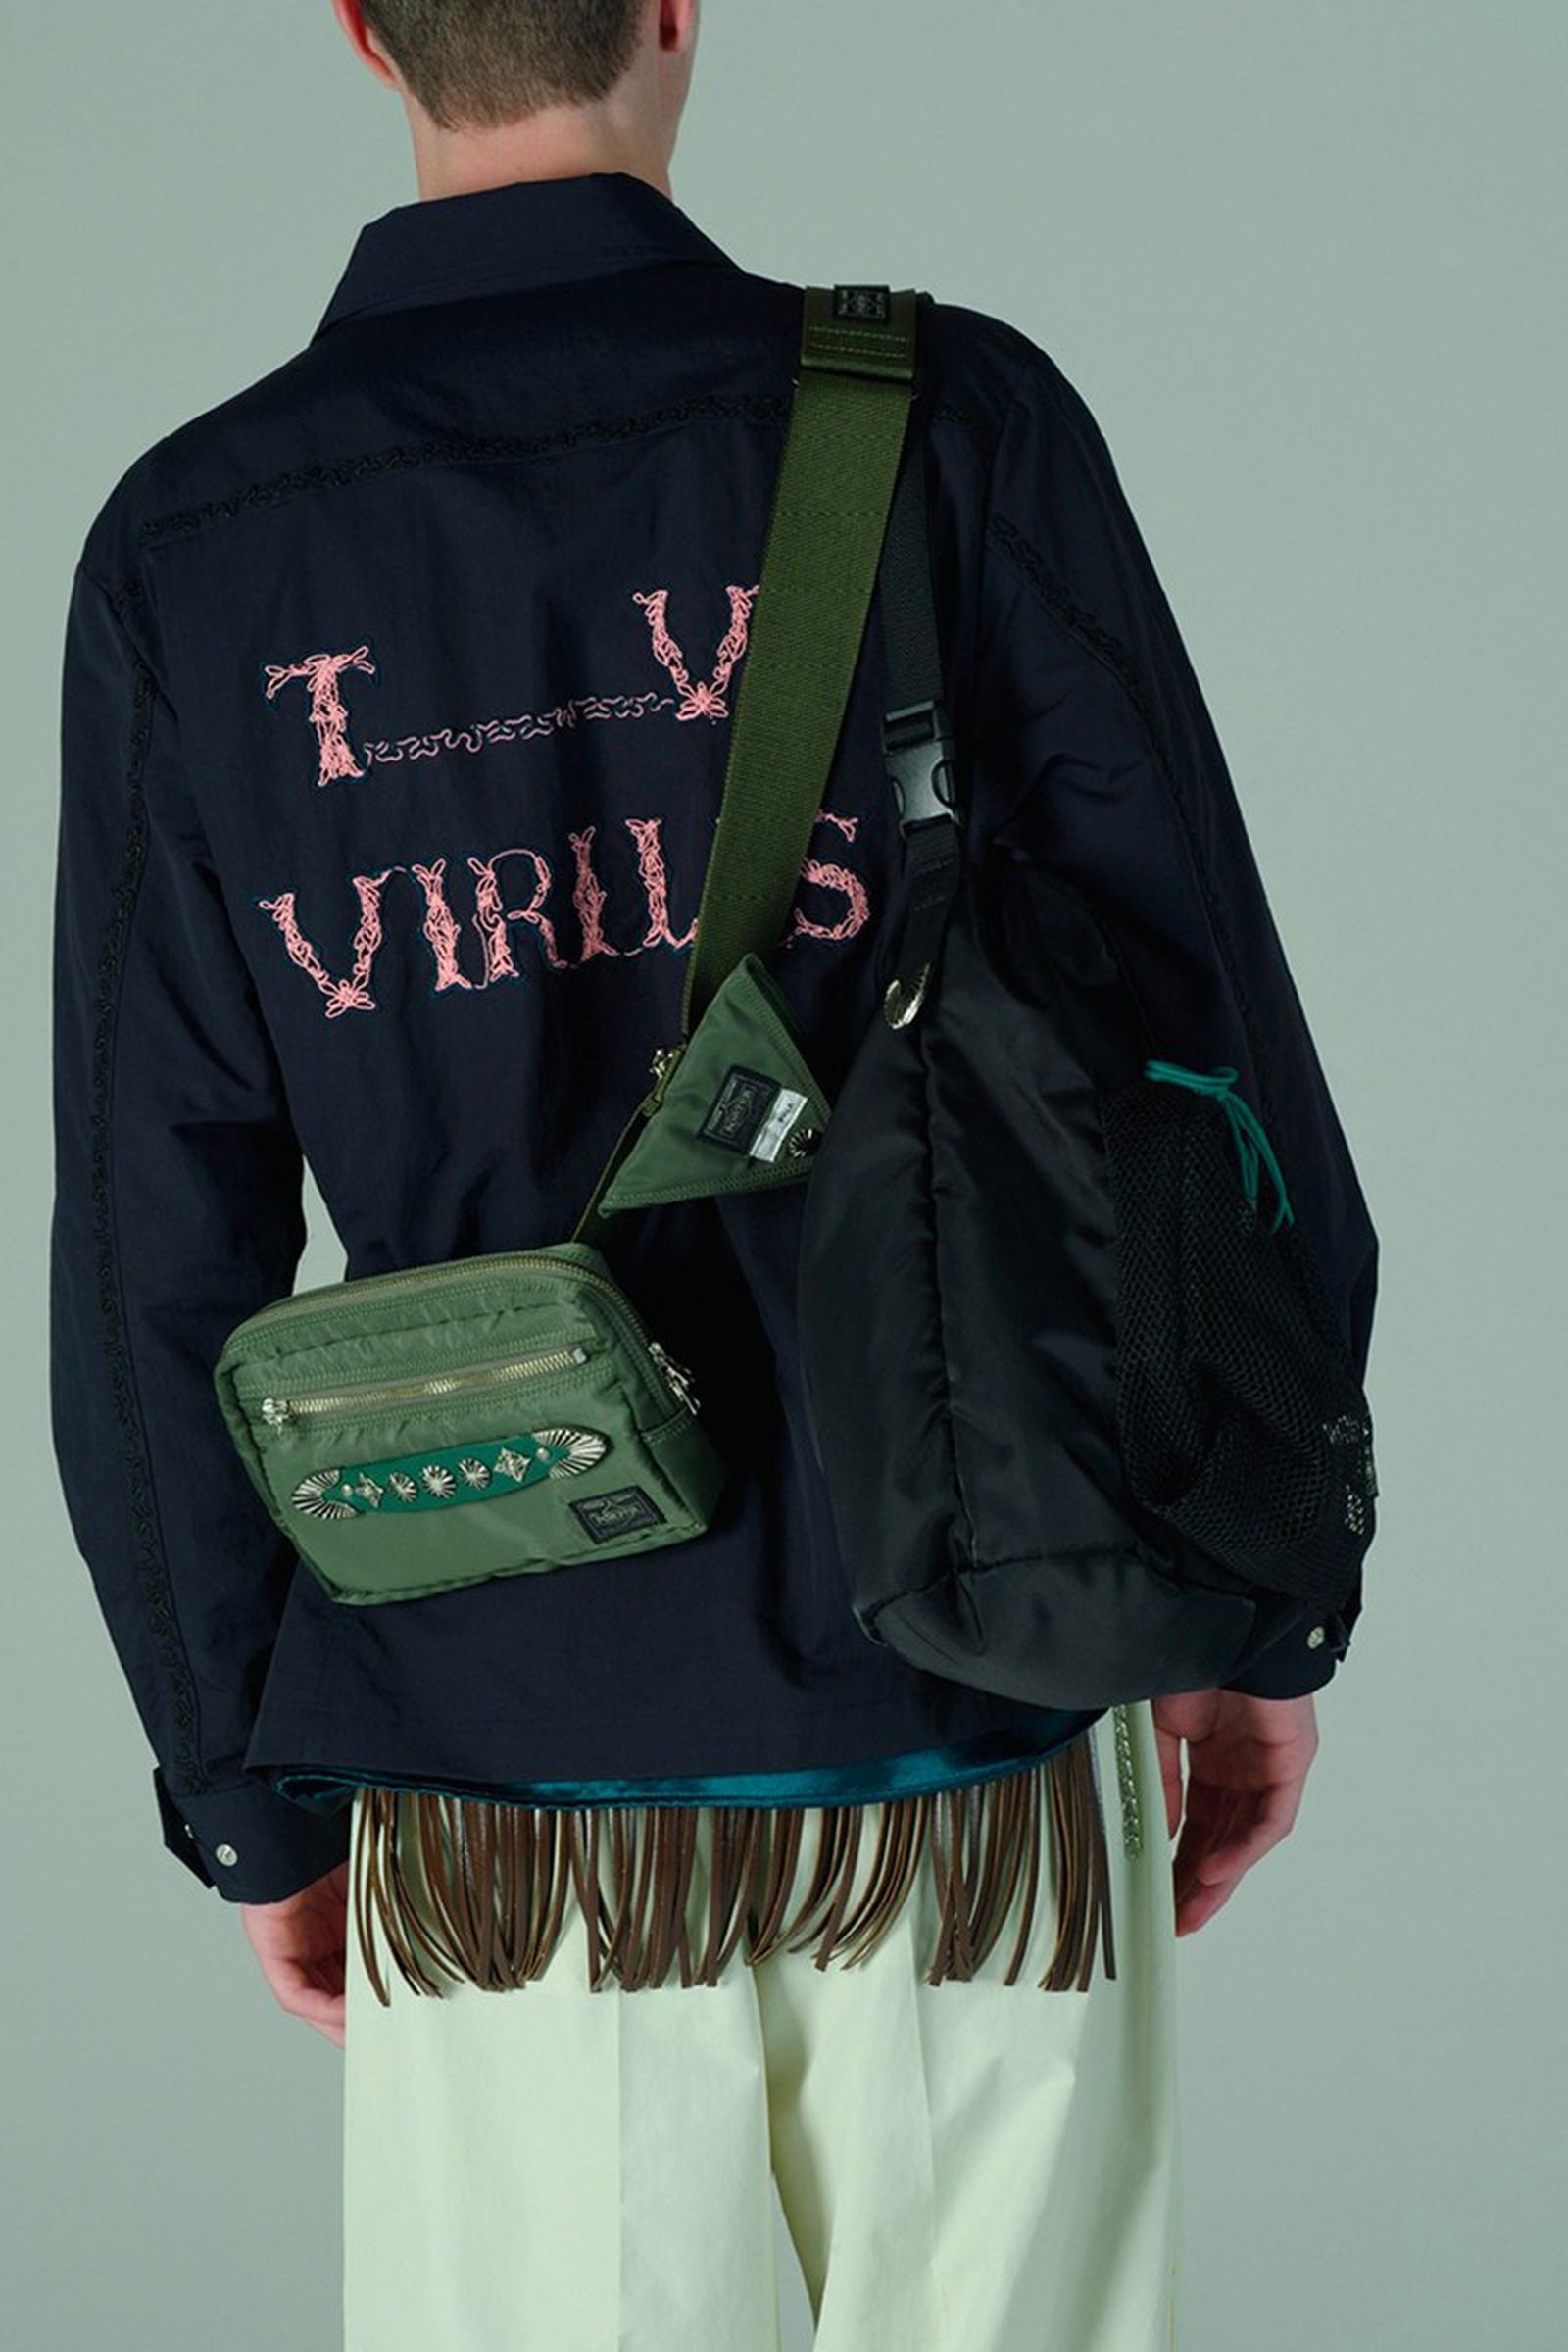 Toga Pulla x PORTER STAND SS19 Bag Capsule: Second Release